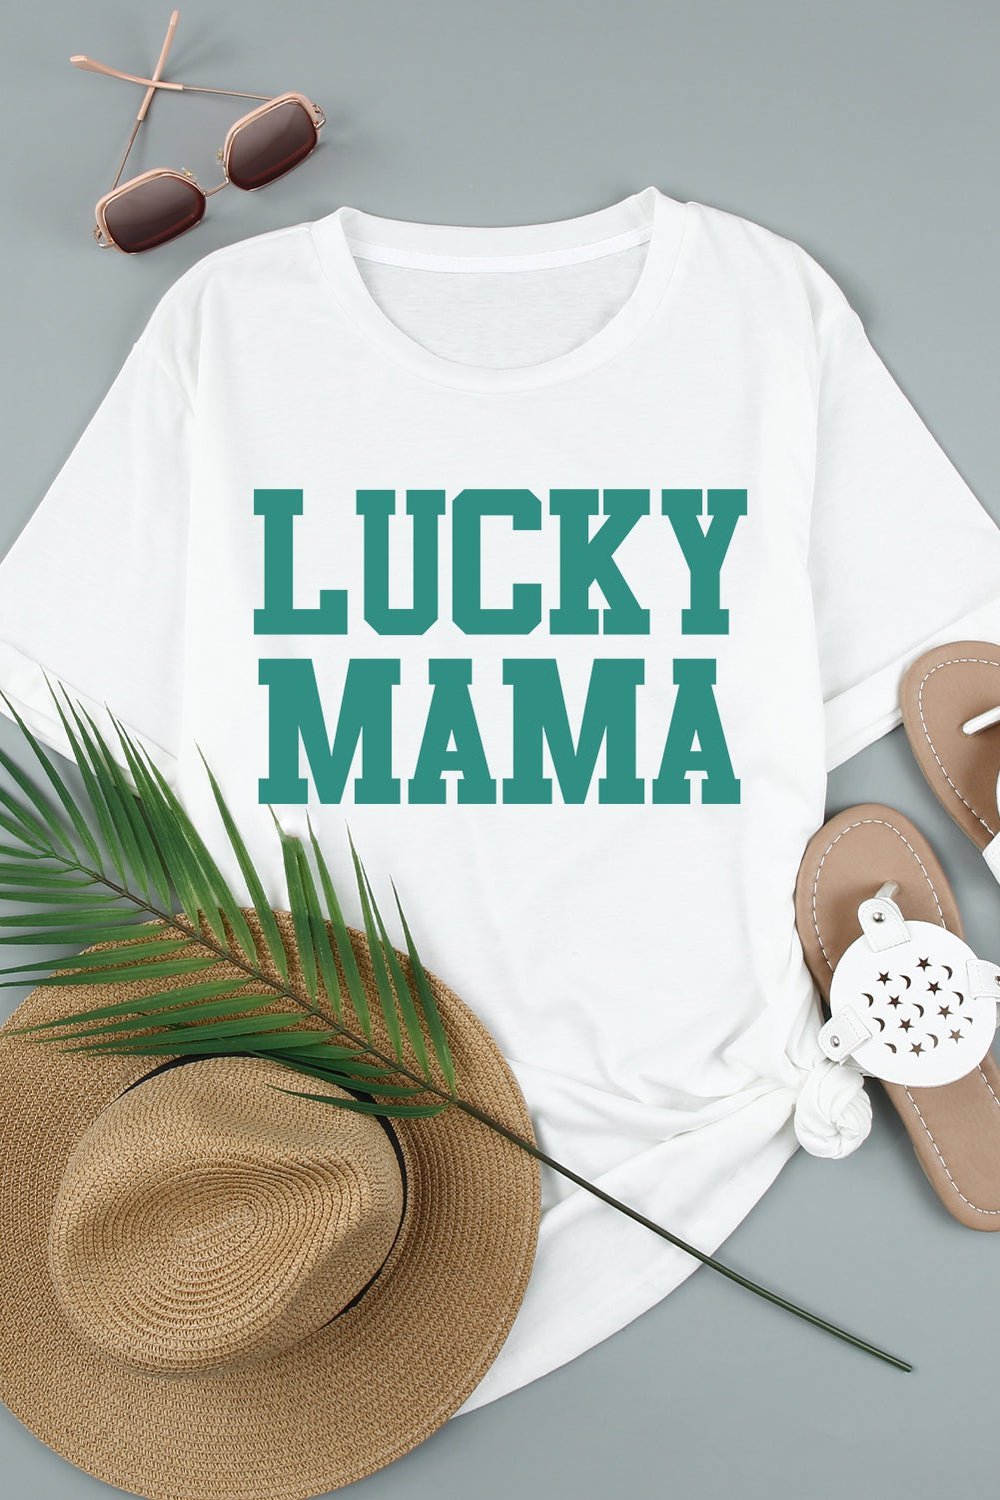 LUCKY MAMA Graphic Round Neck Tee - T-Shirts - FITGGINS